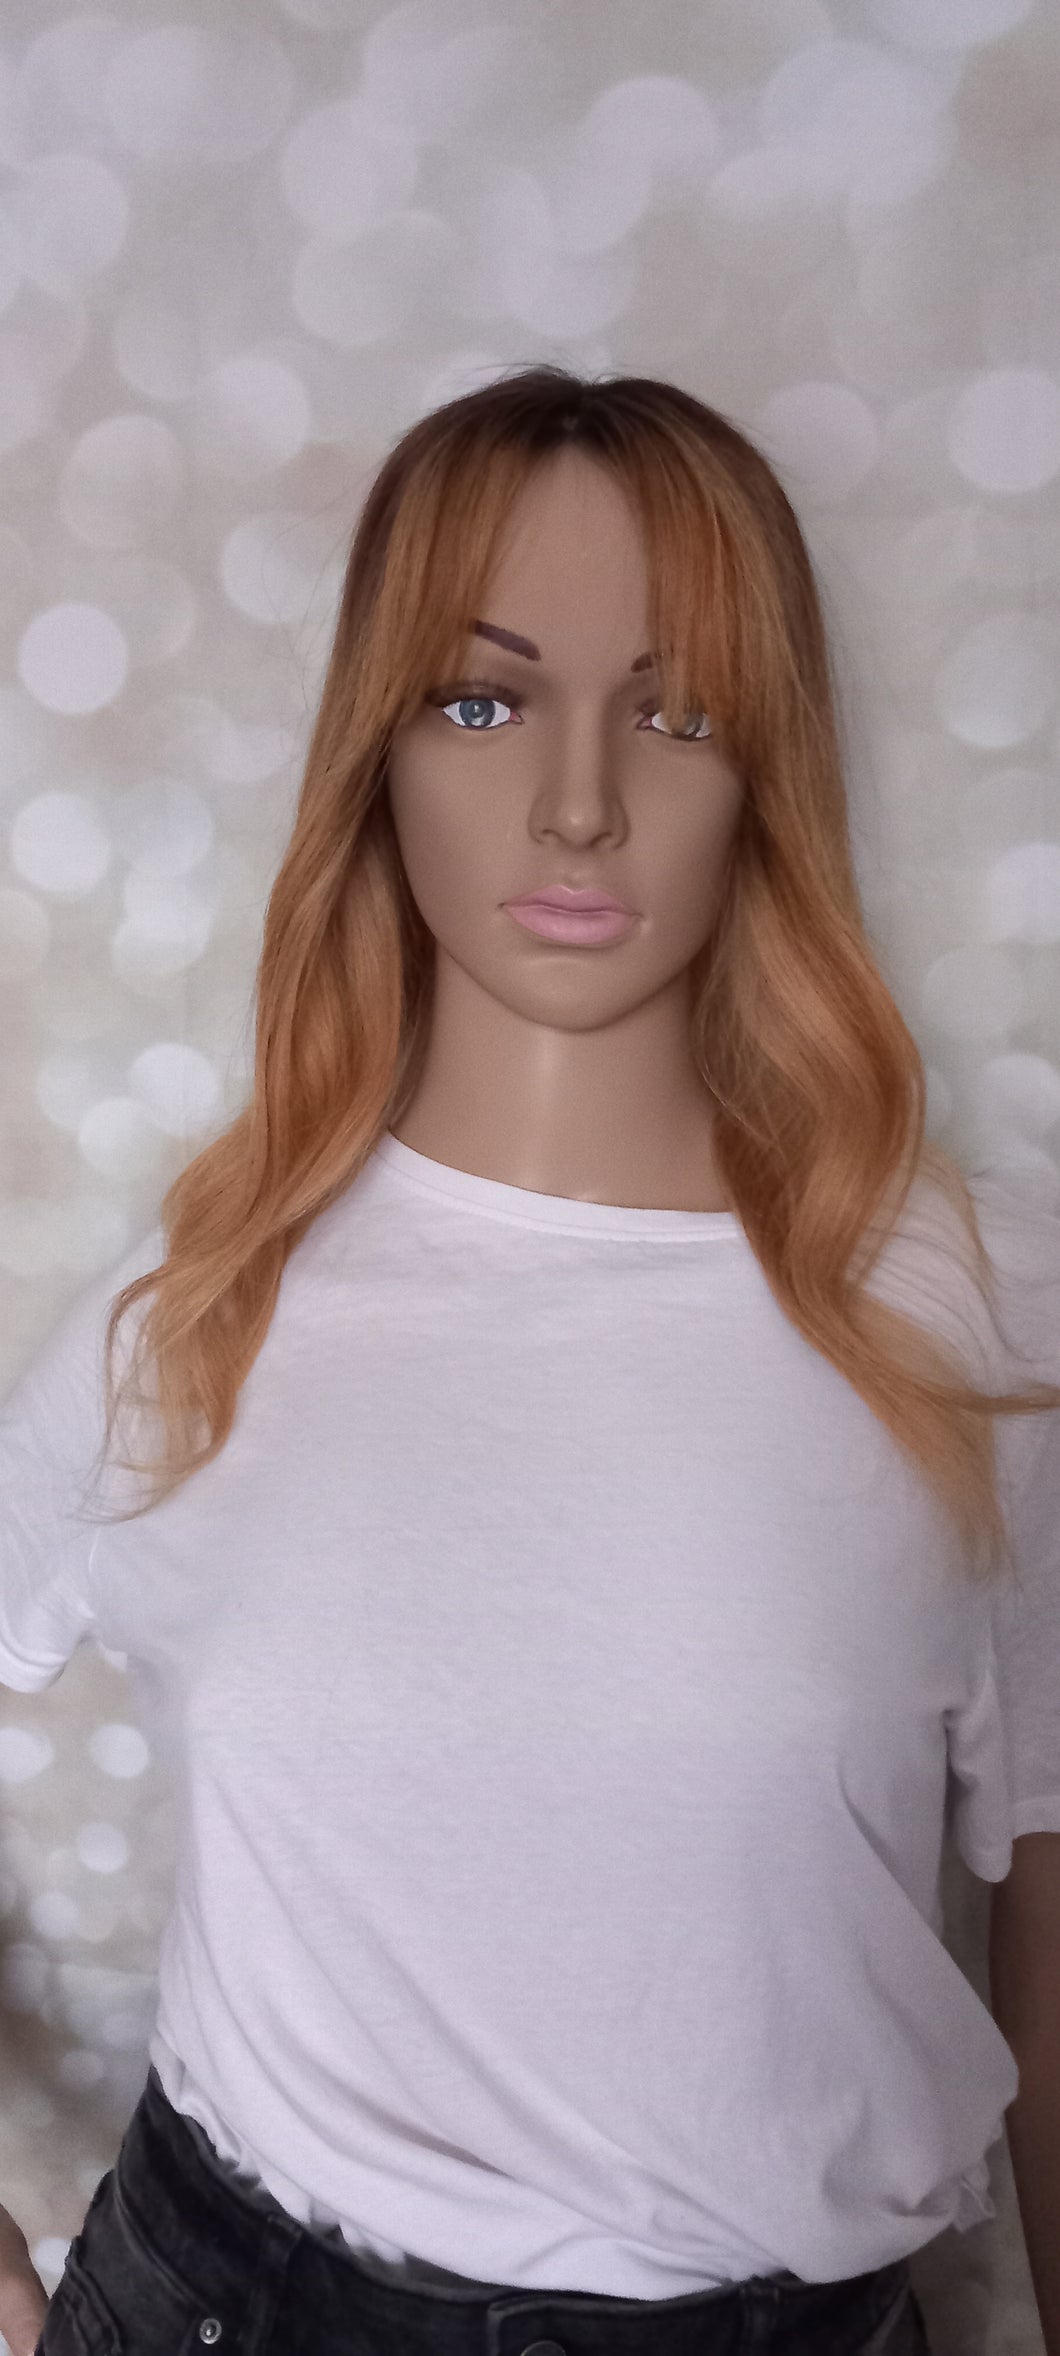 Human hair topper with silk base, realistic scalp effect, strawberry blonde balayage